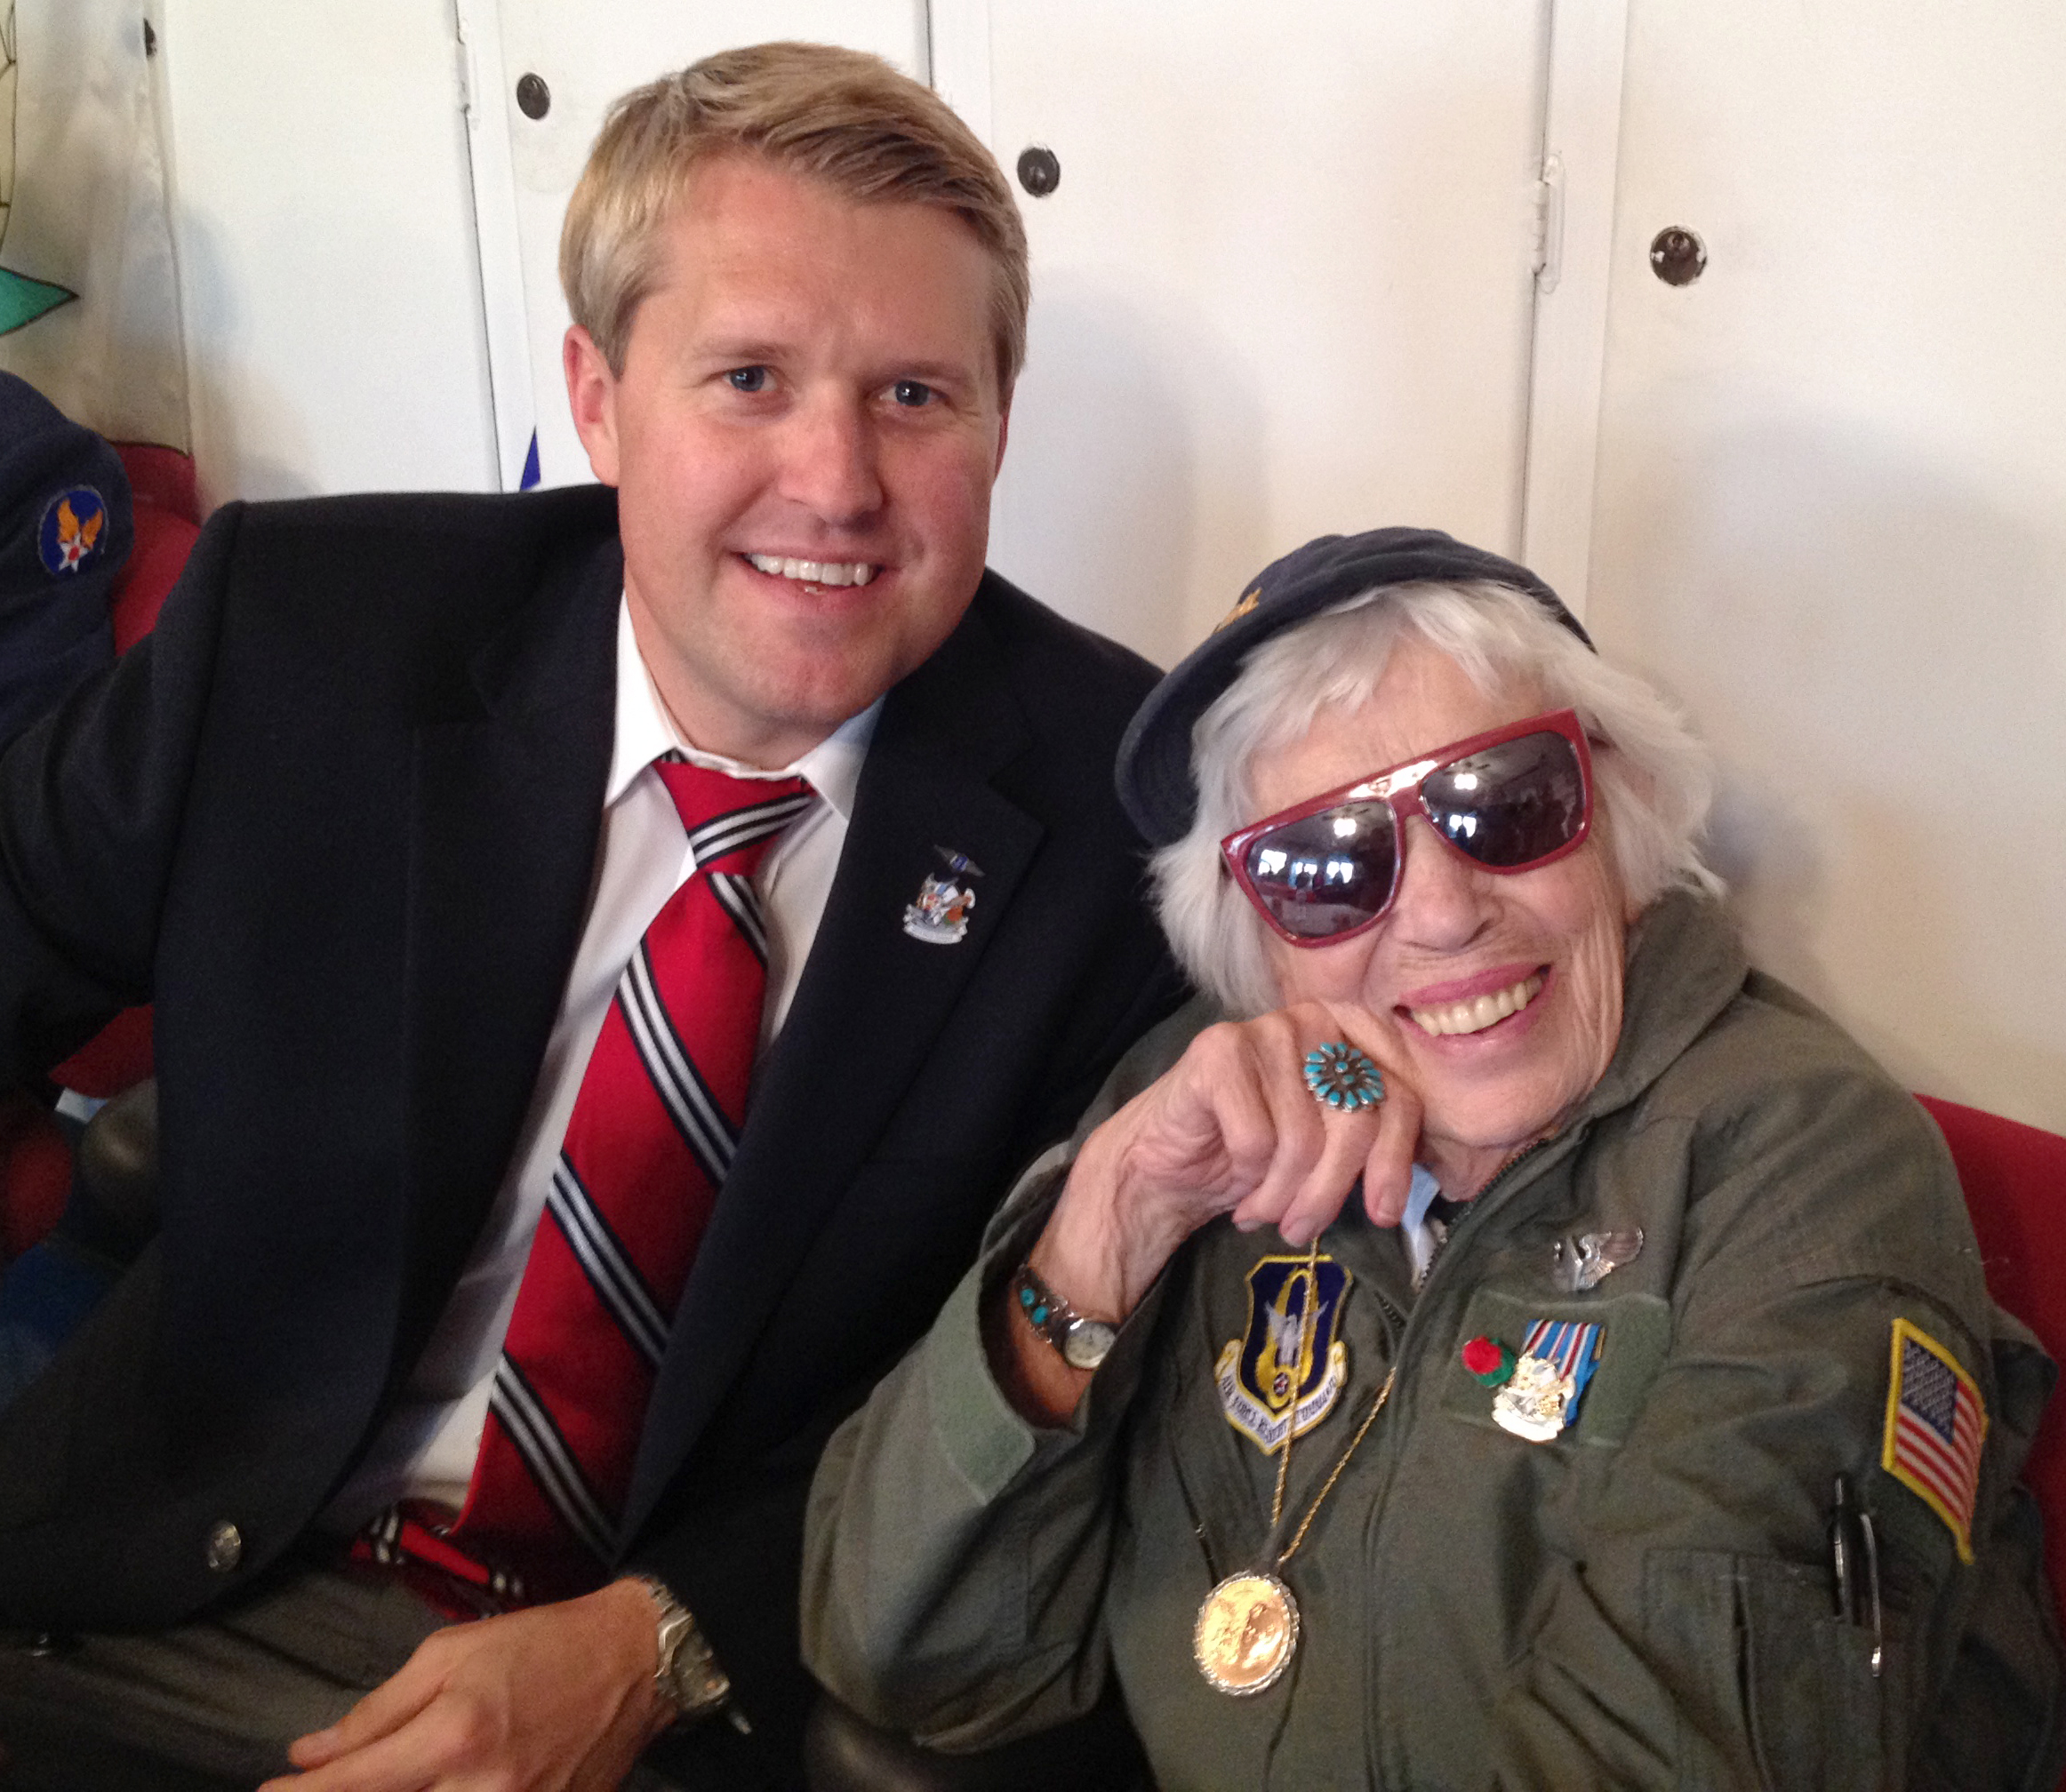 Sandberg with Jean McCreedy, a member of a World War II women's military pilot group that Sandberg's Condor Squadron honored in December 2013.